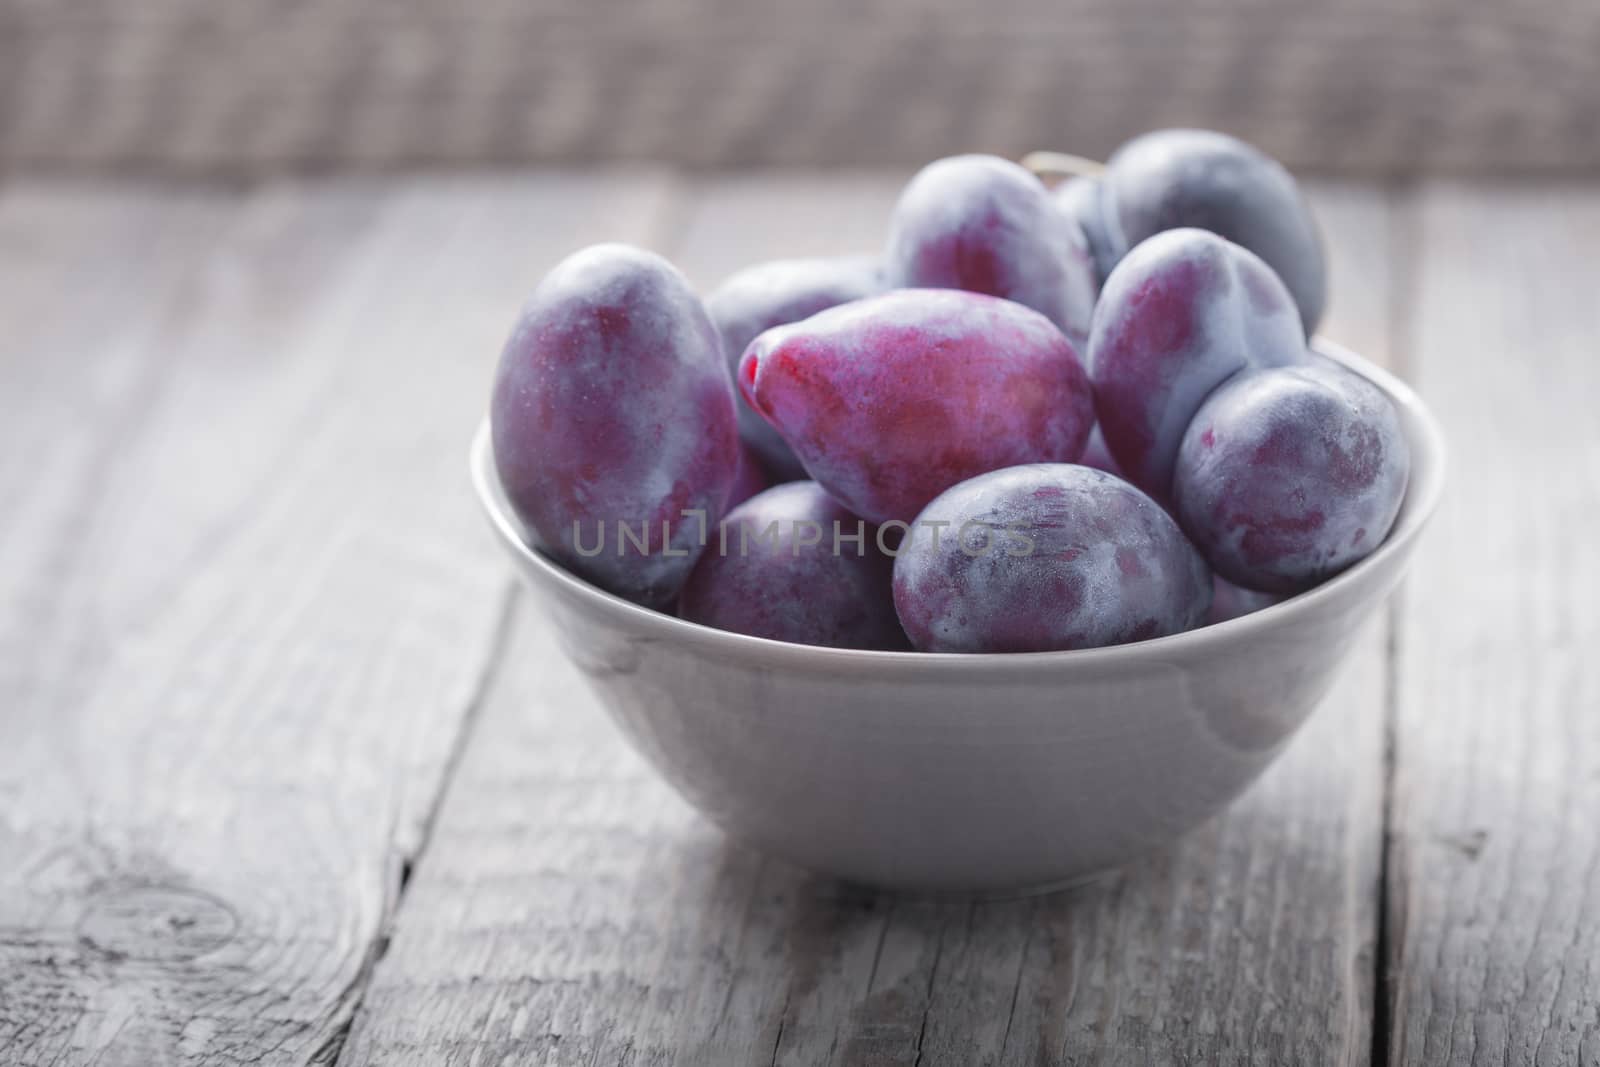 Bunch of Plums on a wooden table.